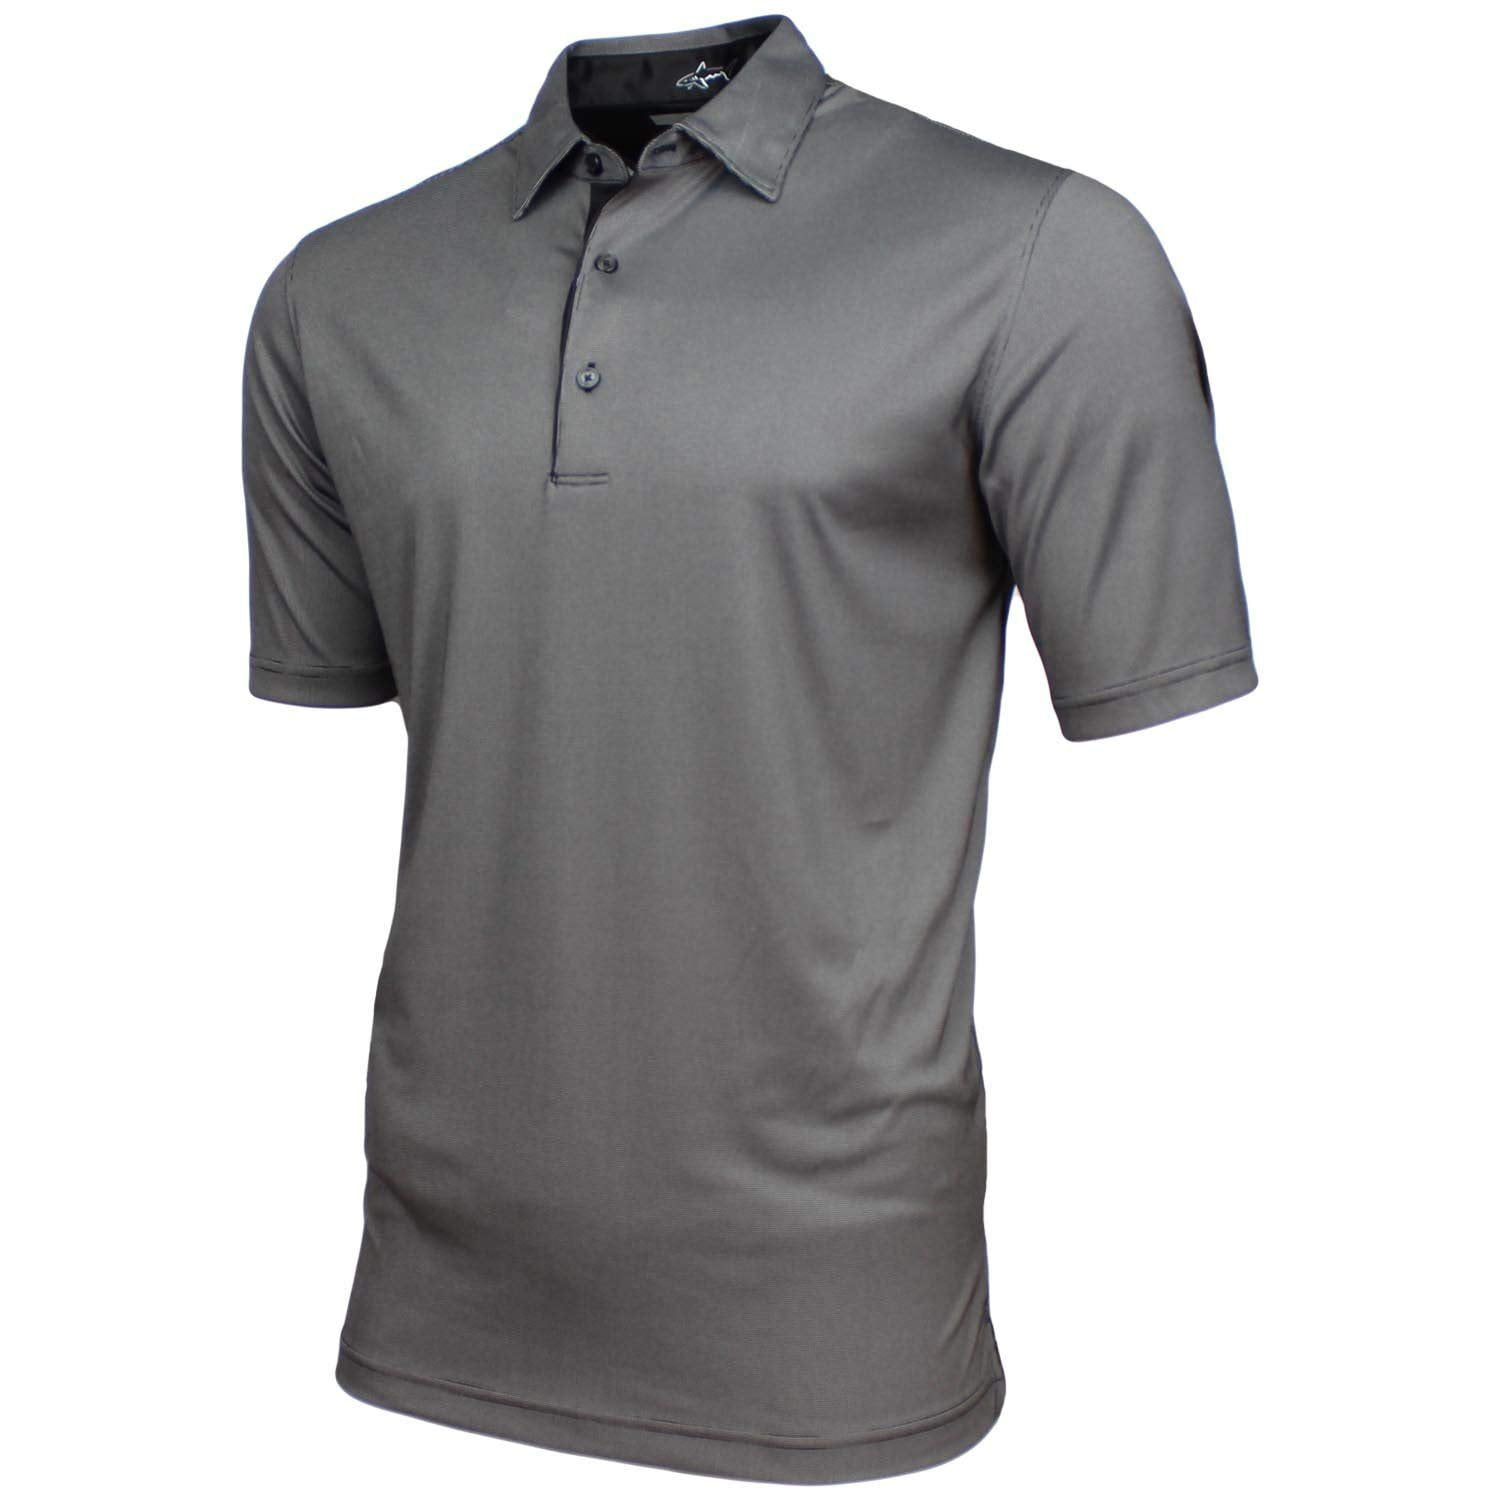 Greg Norman Mens Technical Performance Play Dry Golf Polo (Large, Black ...